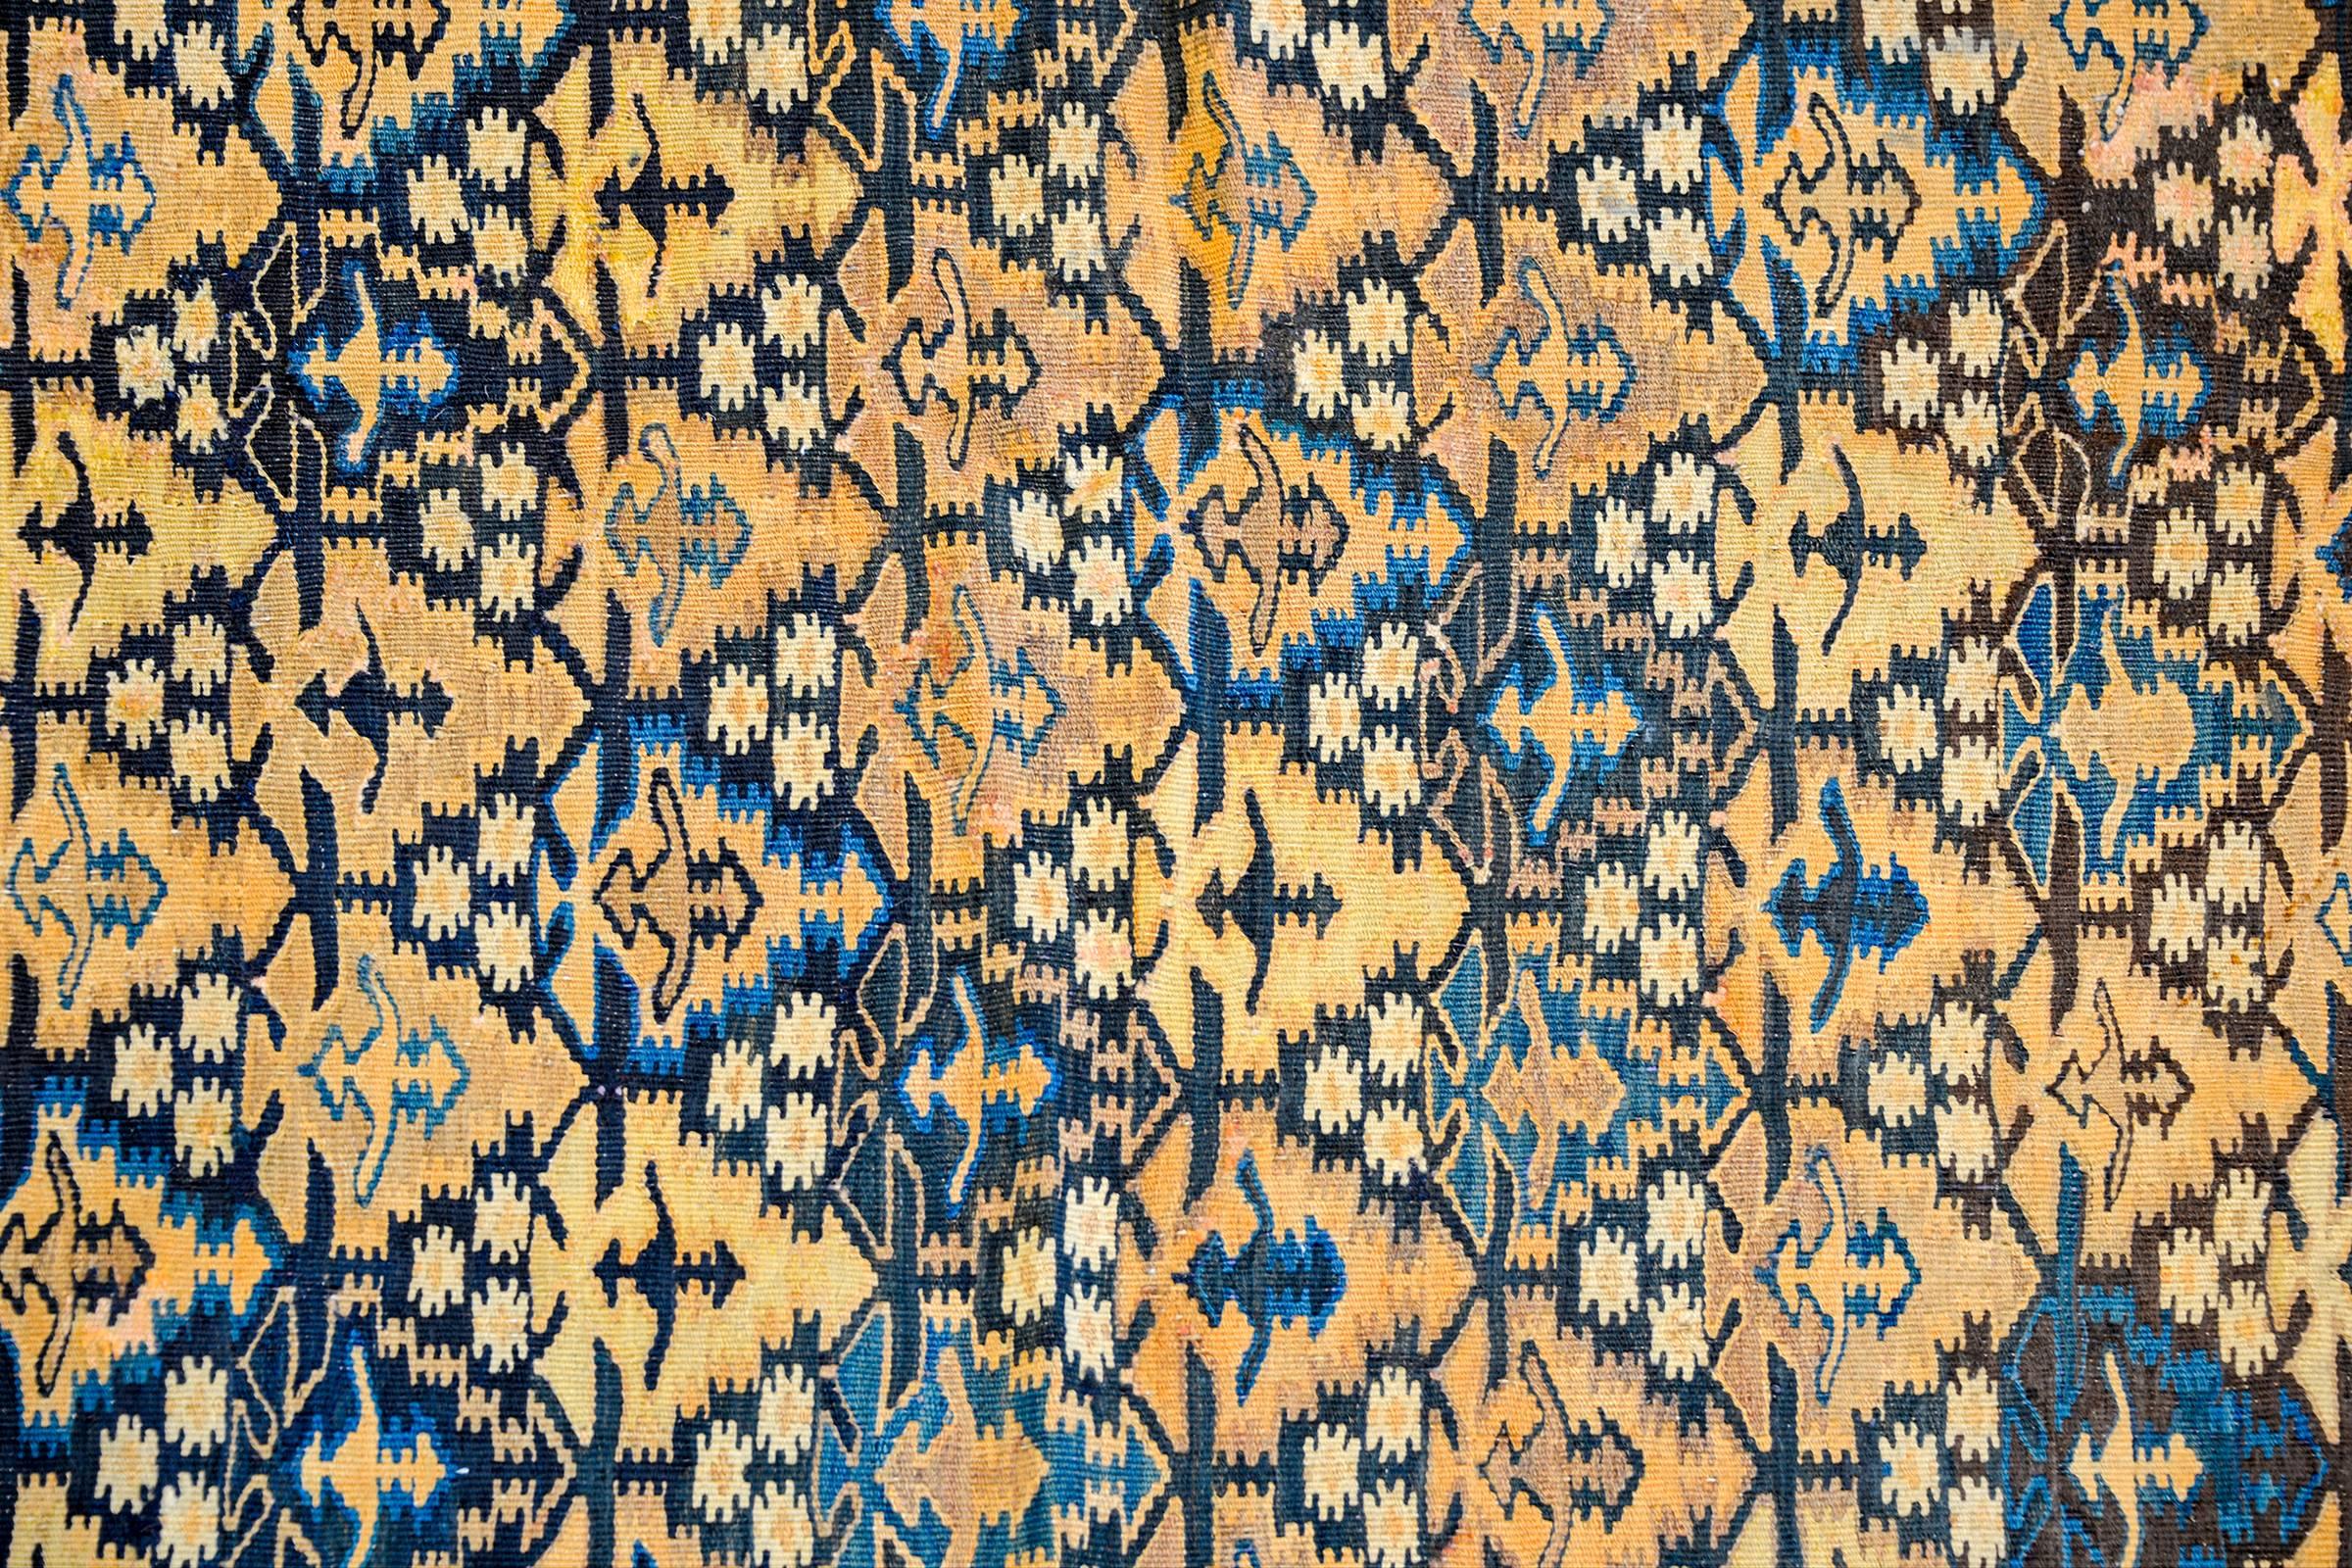 A wonderful early 20th century Persian Qazvin Kilim rug with an all-over tree-of-life pattern woven in indigo, green, gold, and natural undyed wools. The border is complex, woven with multiple geometric designs.